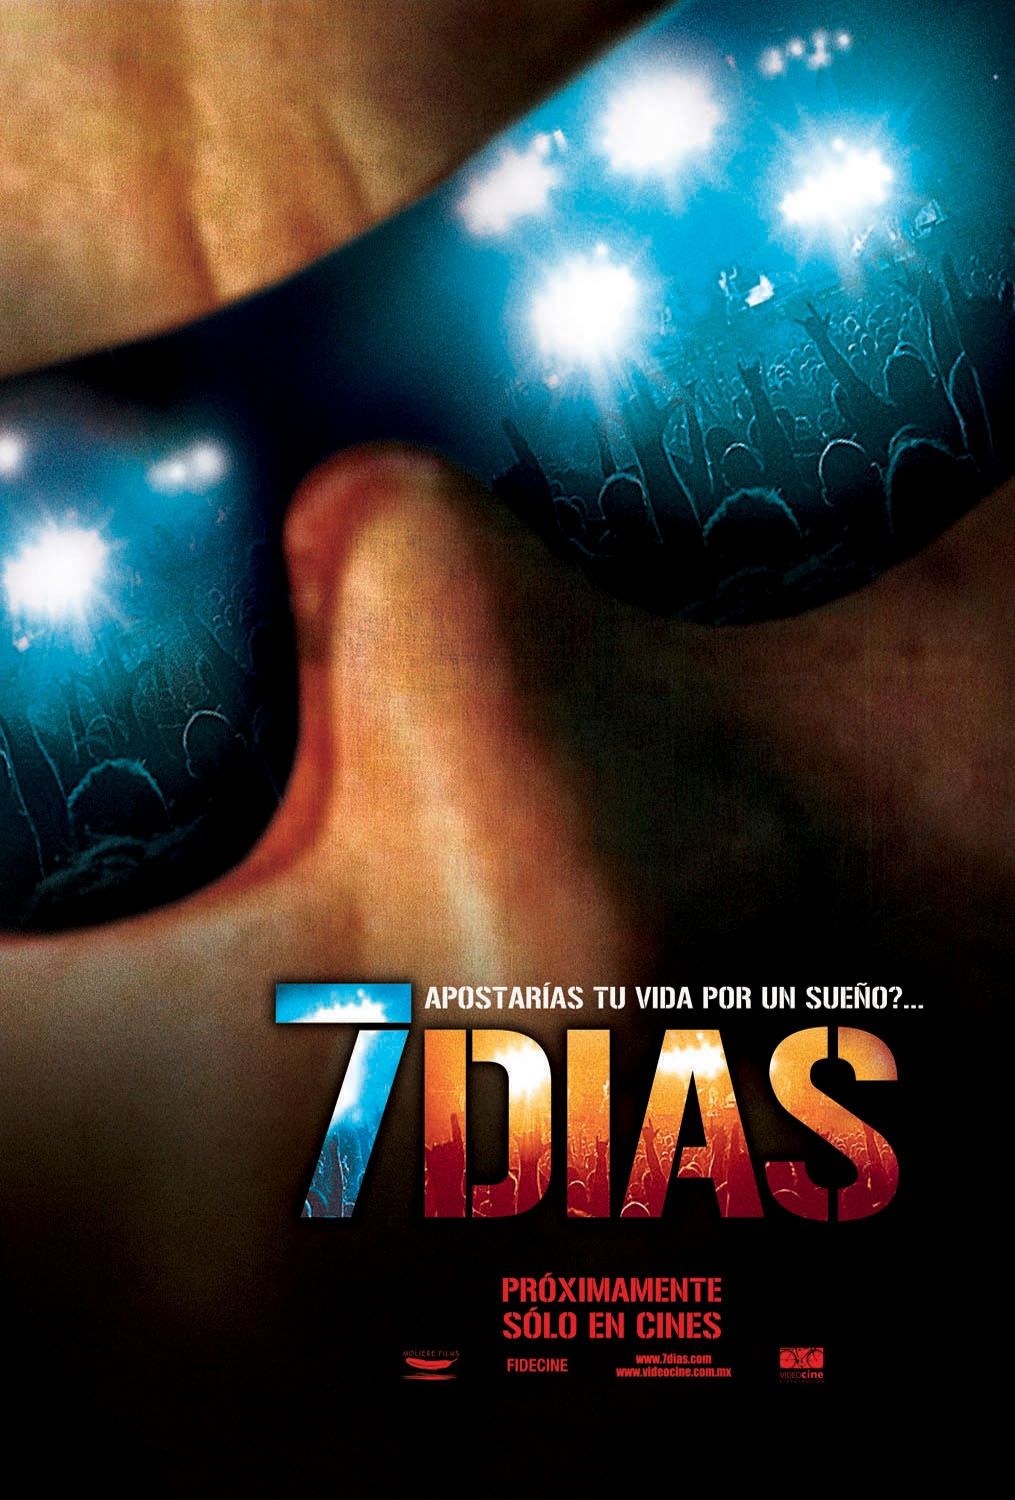 Extra Large Movie Poster Image for 7 días (#2 of 2)